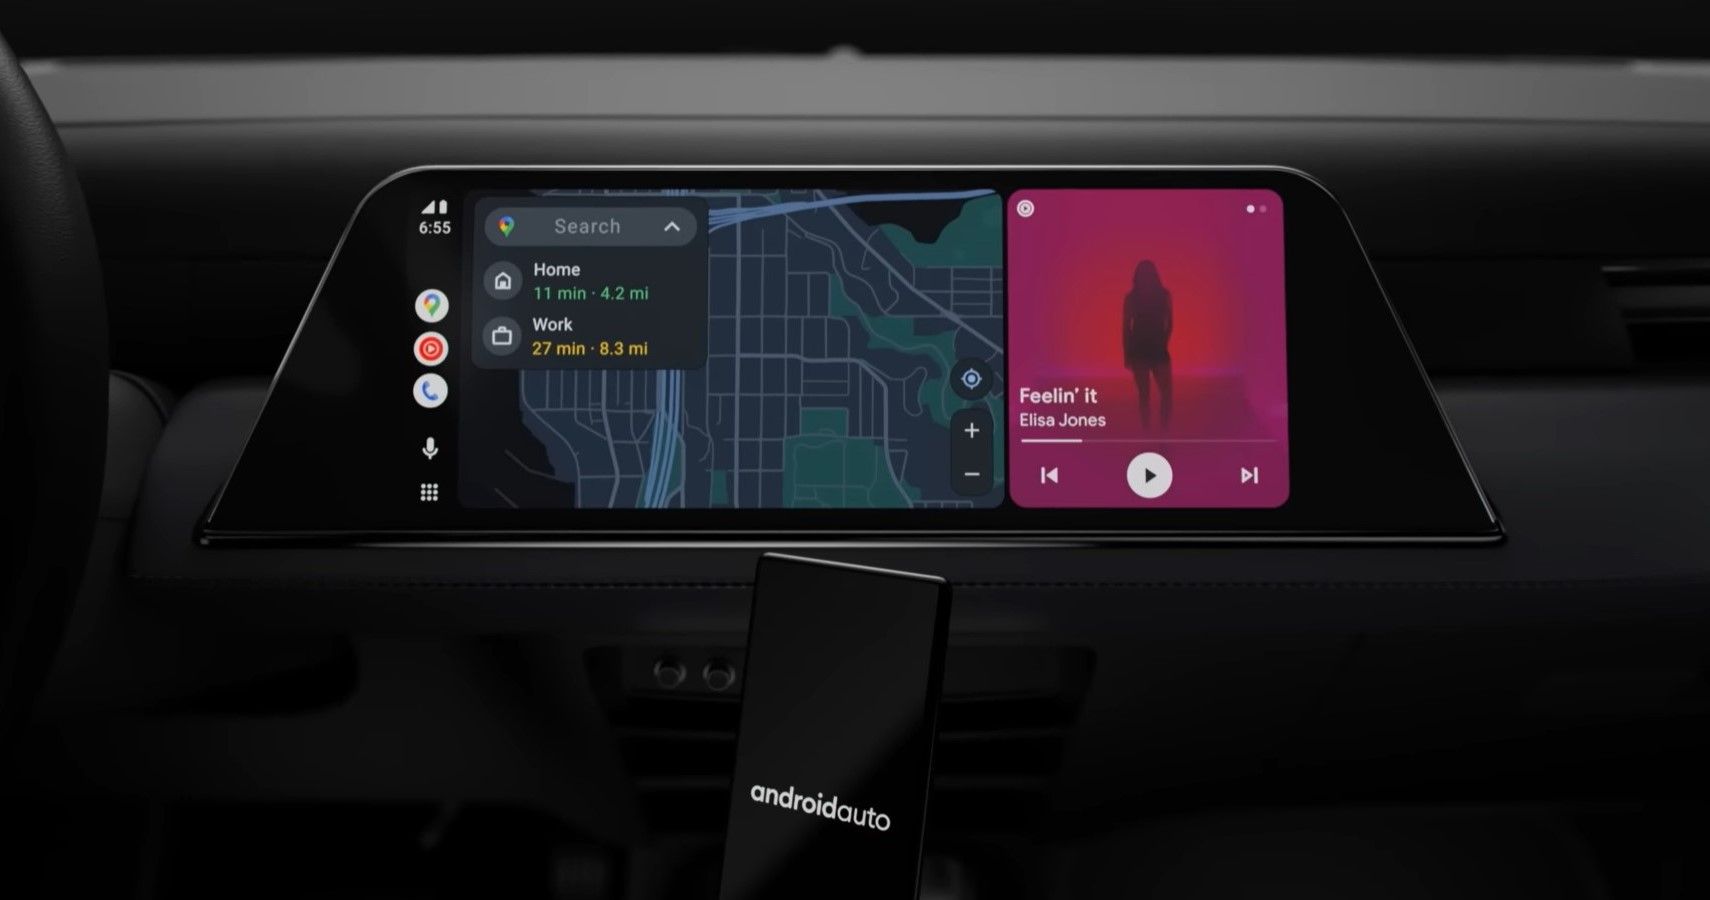 All-new Android Auto new visual layout view